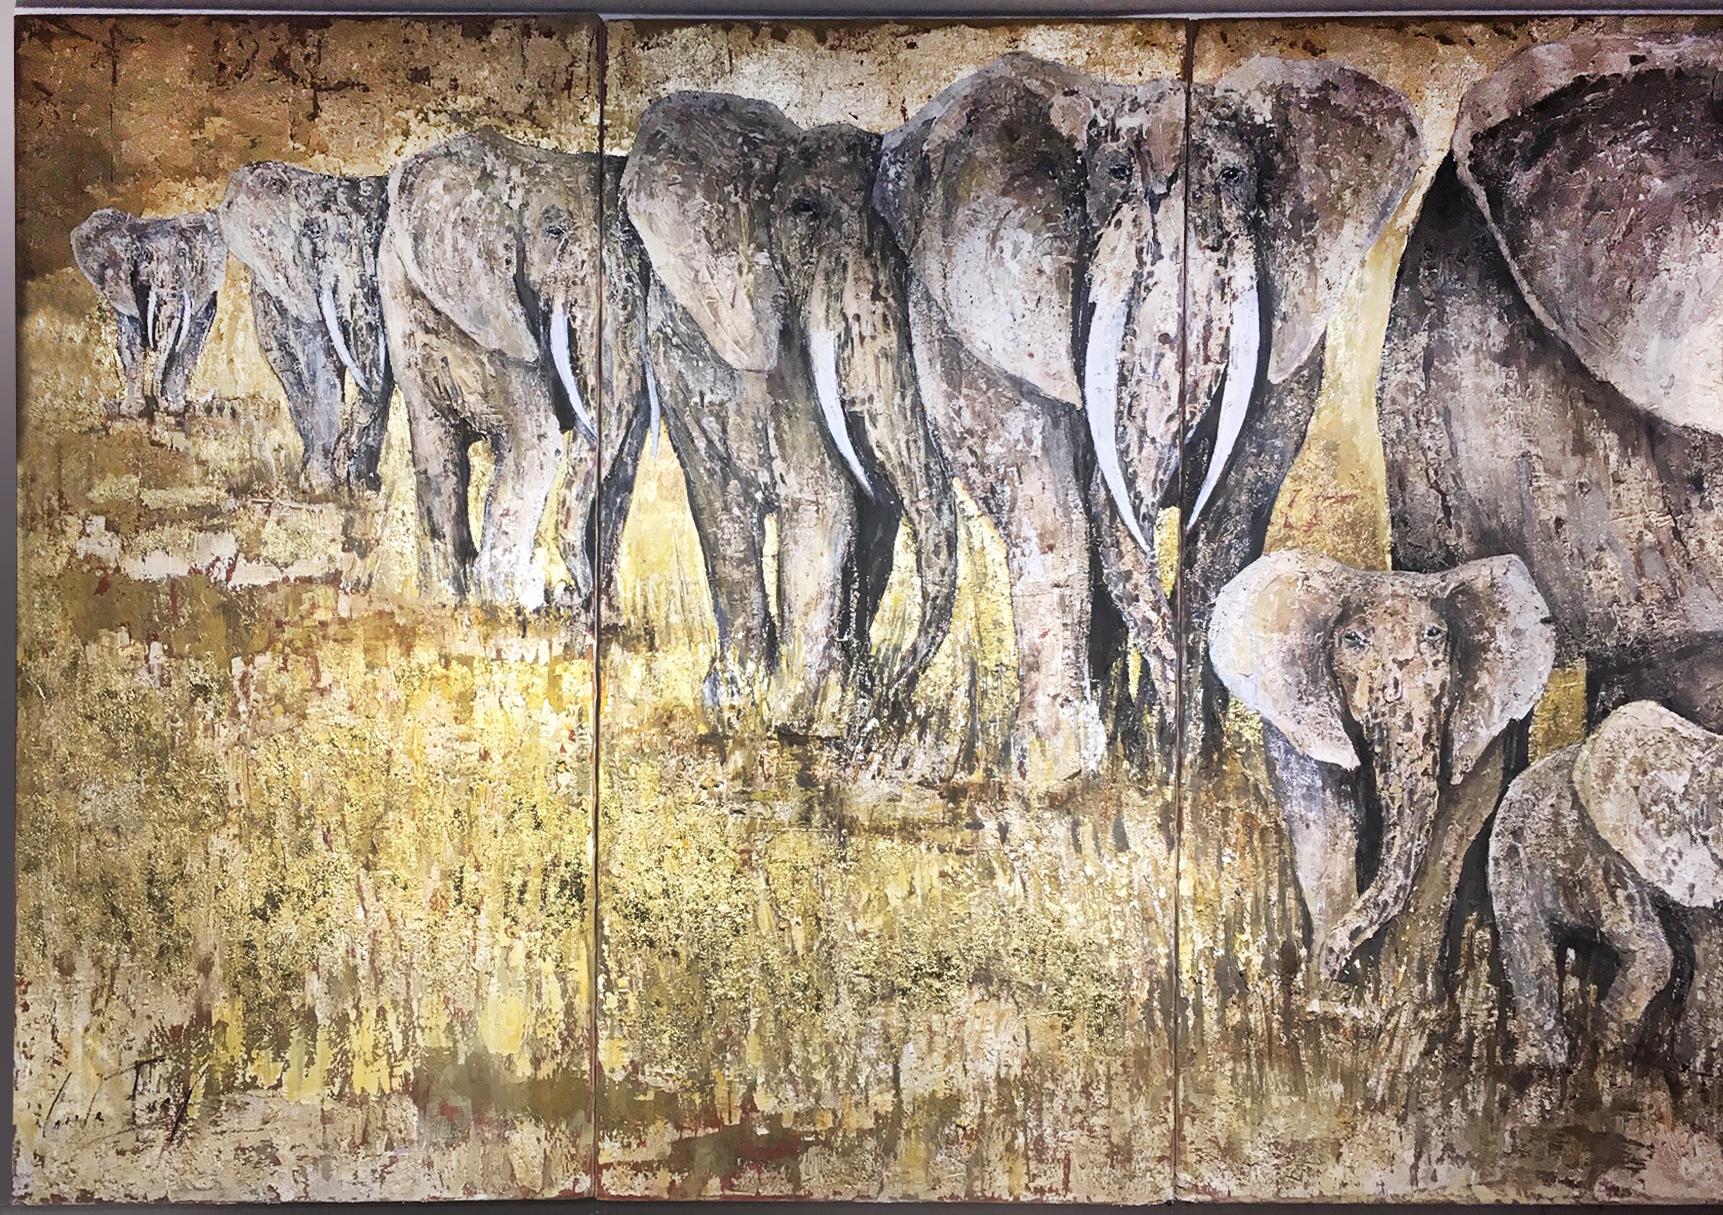 Painting of elephants made on 4 canvas,
painting made with marble dust and oil.
Mixte technical by painter Carole Ivoy.